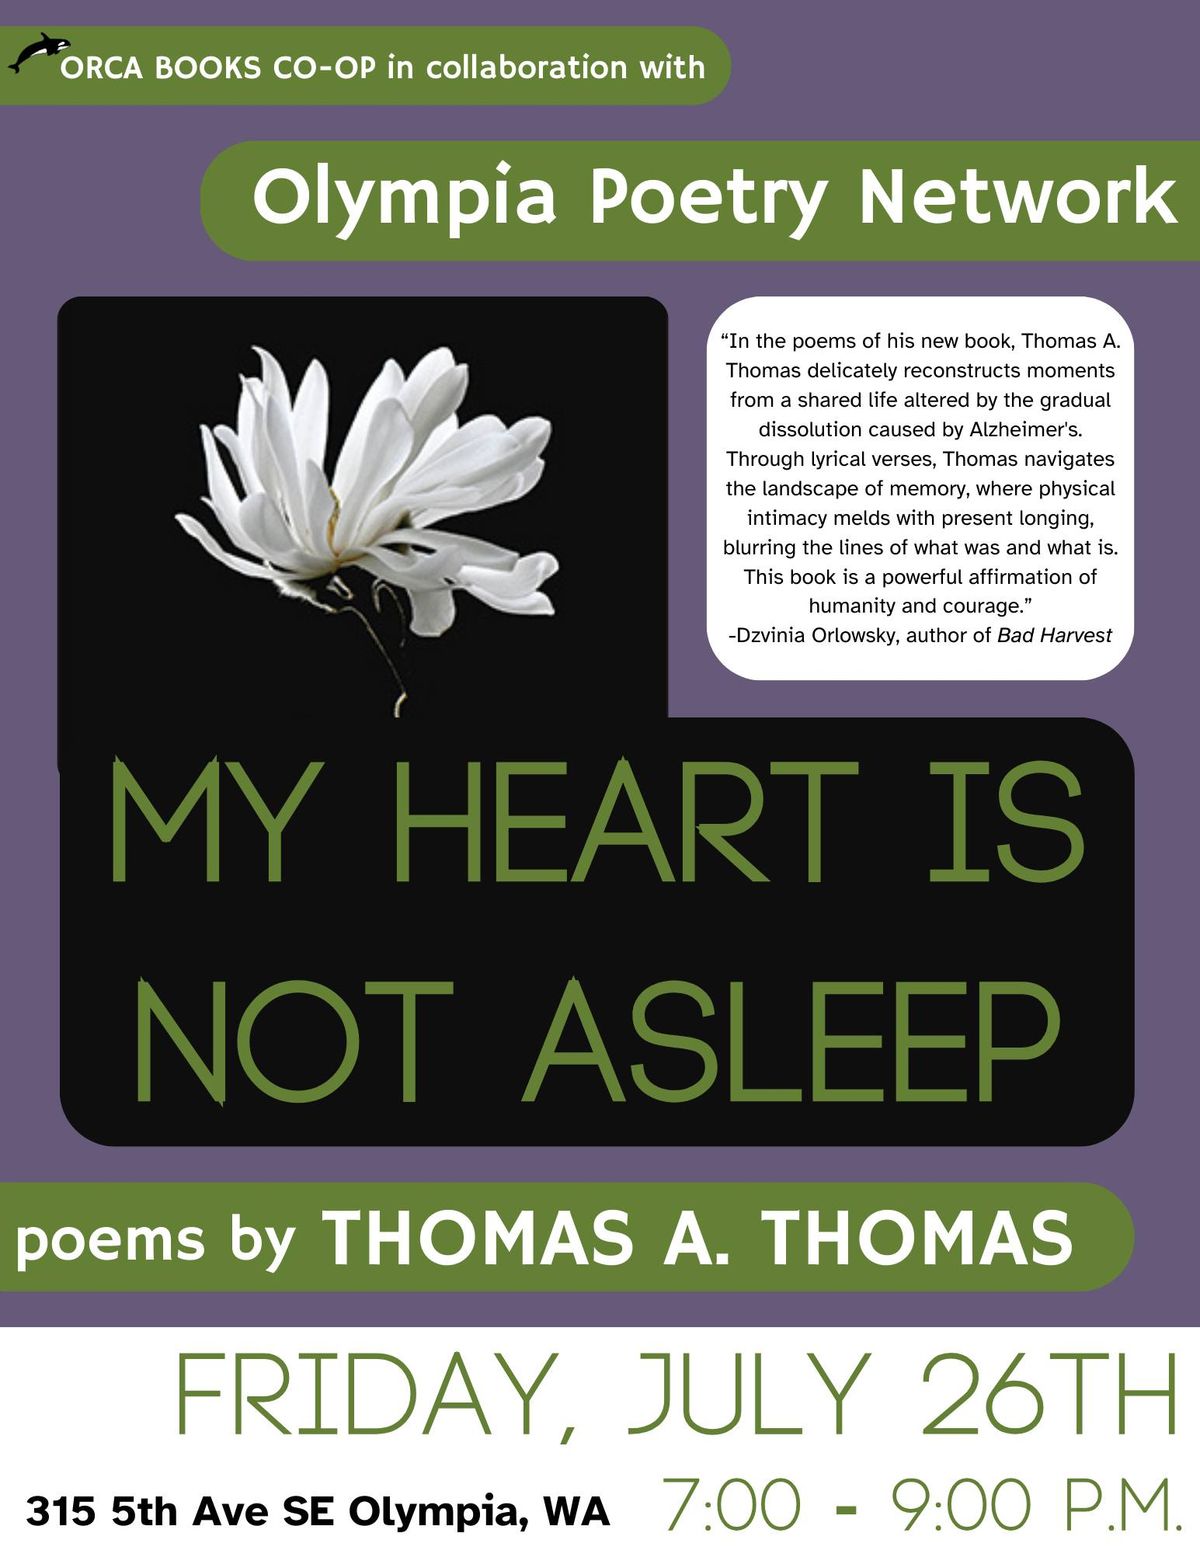 Olympia Poetry Network with Thomas A. Thomas